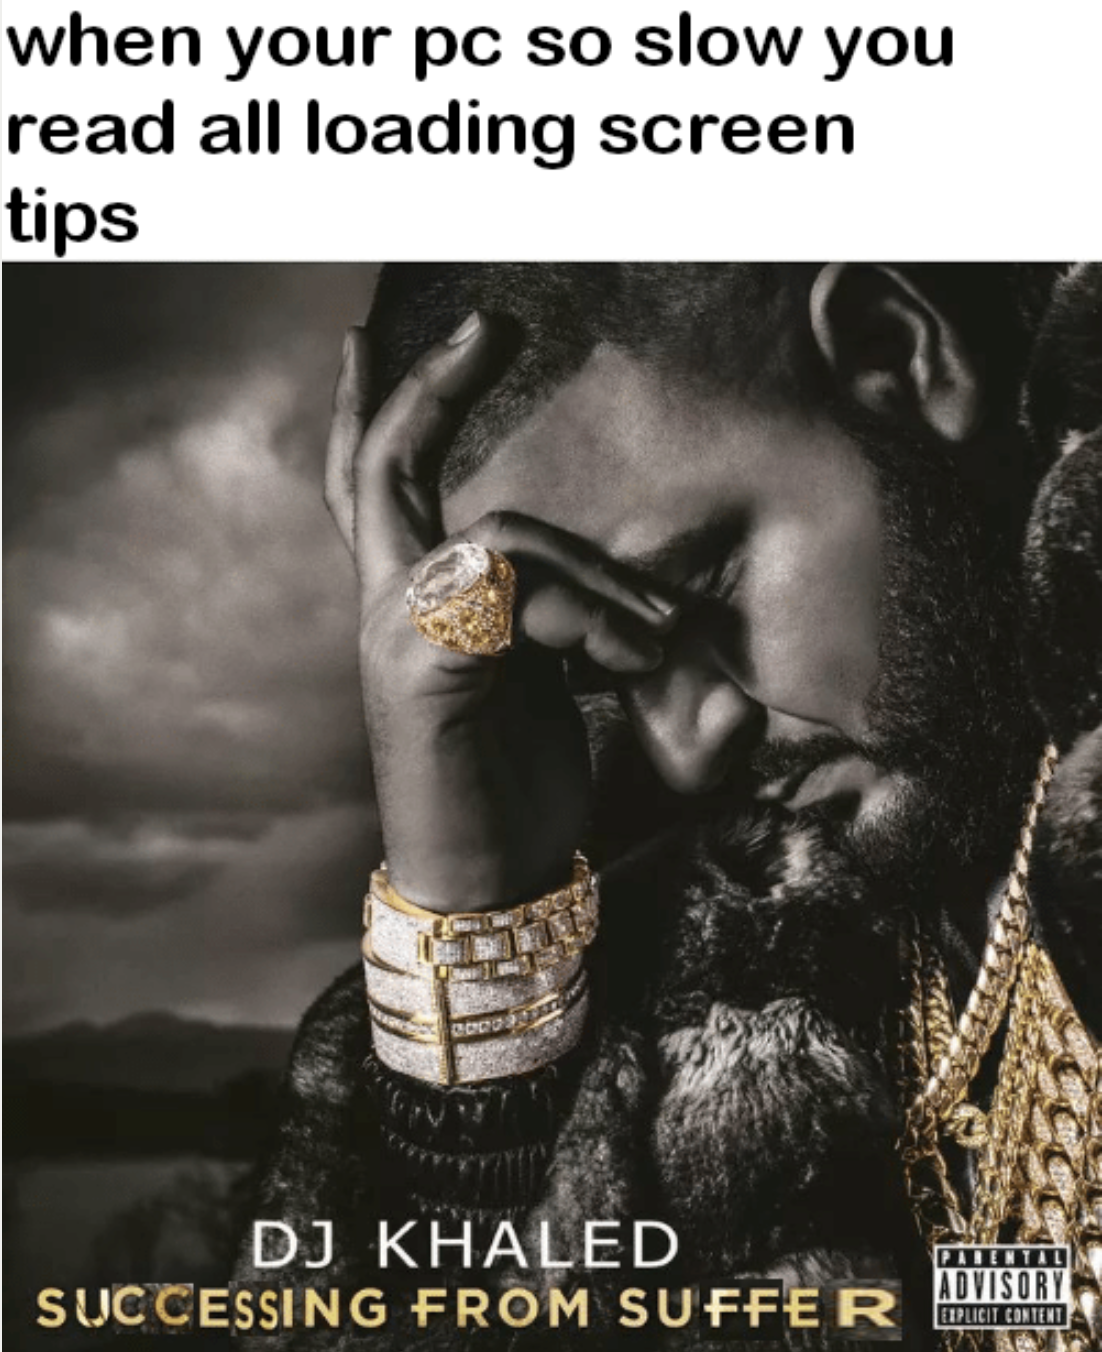 funny gaming memes  - suffering from success meme - when your pc so slow you read all loading screen tips Dj Khaled Do 10 Successing From Suffer Advisory Eller